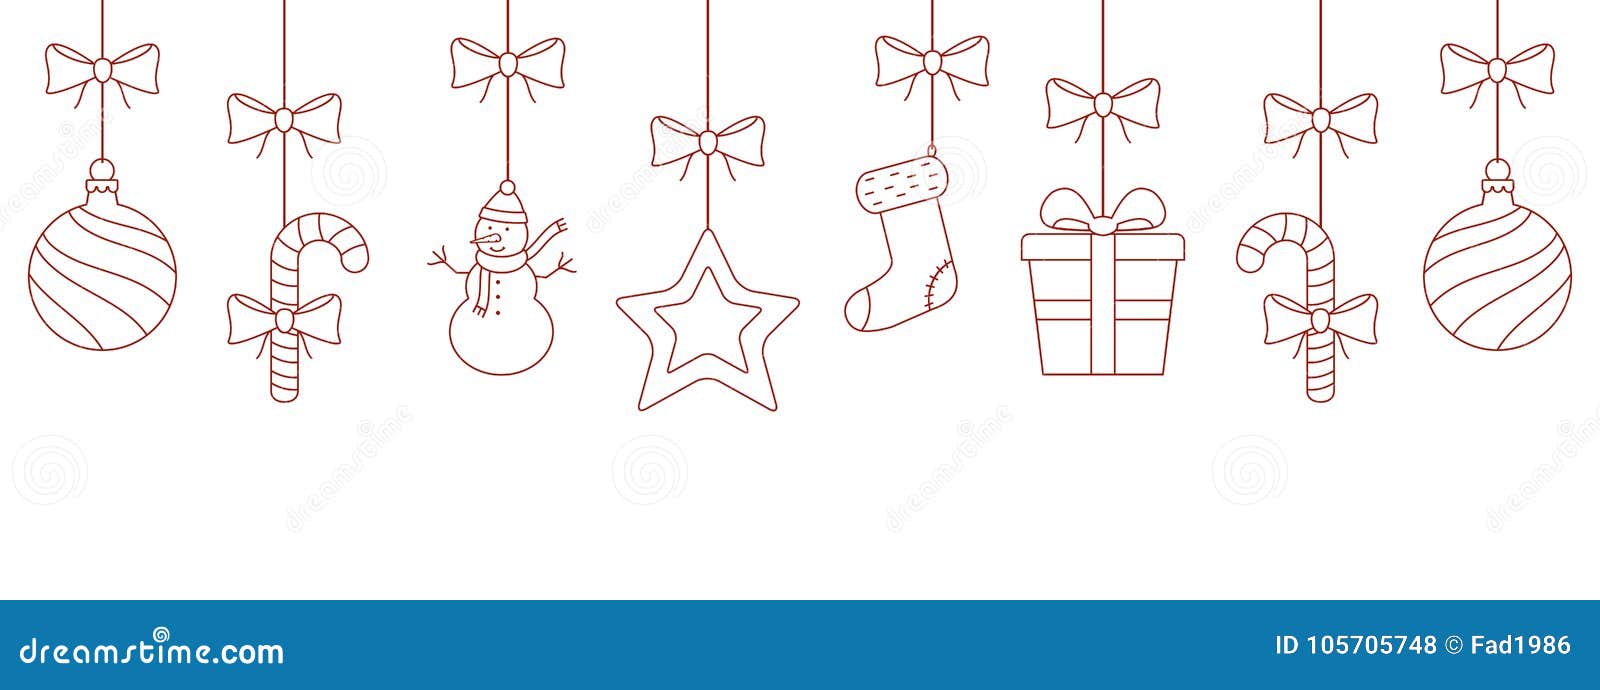 Download Christmas Outline Ornaments Hanging Stock Vector ...